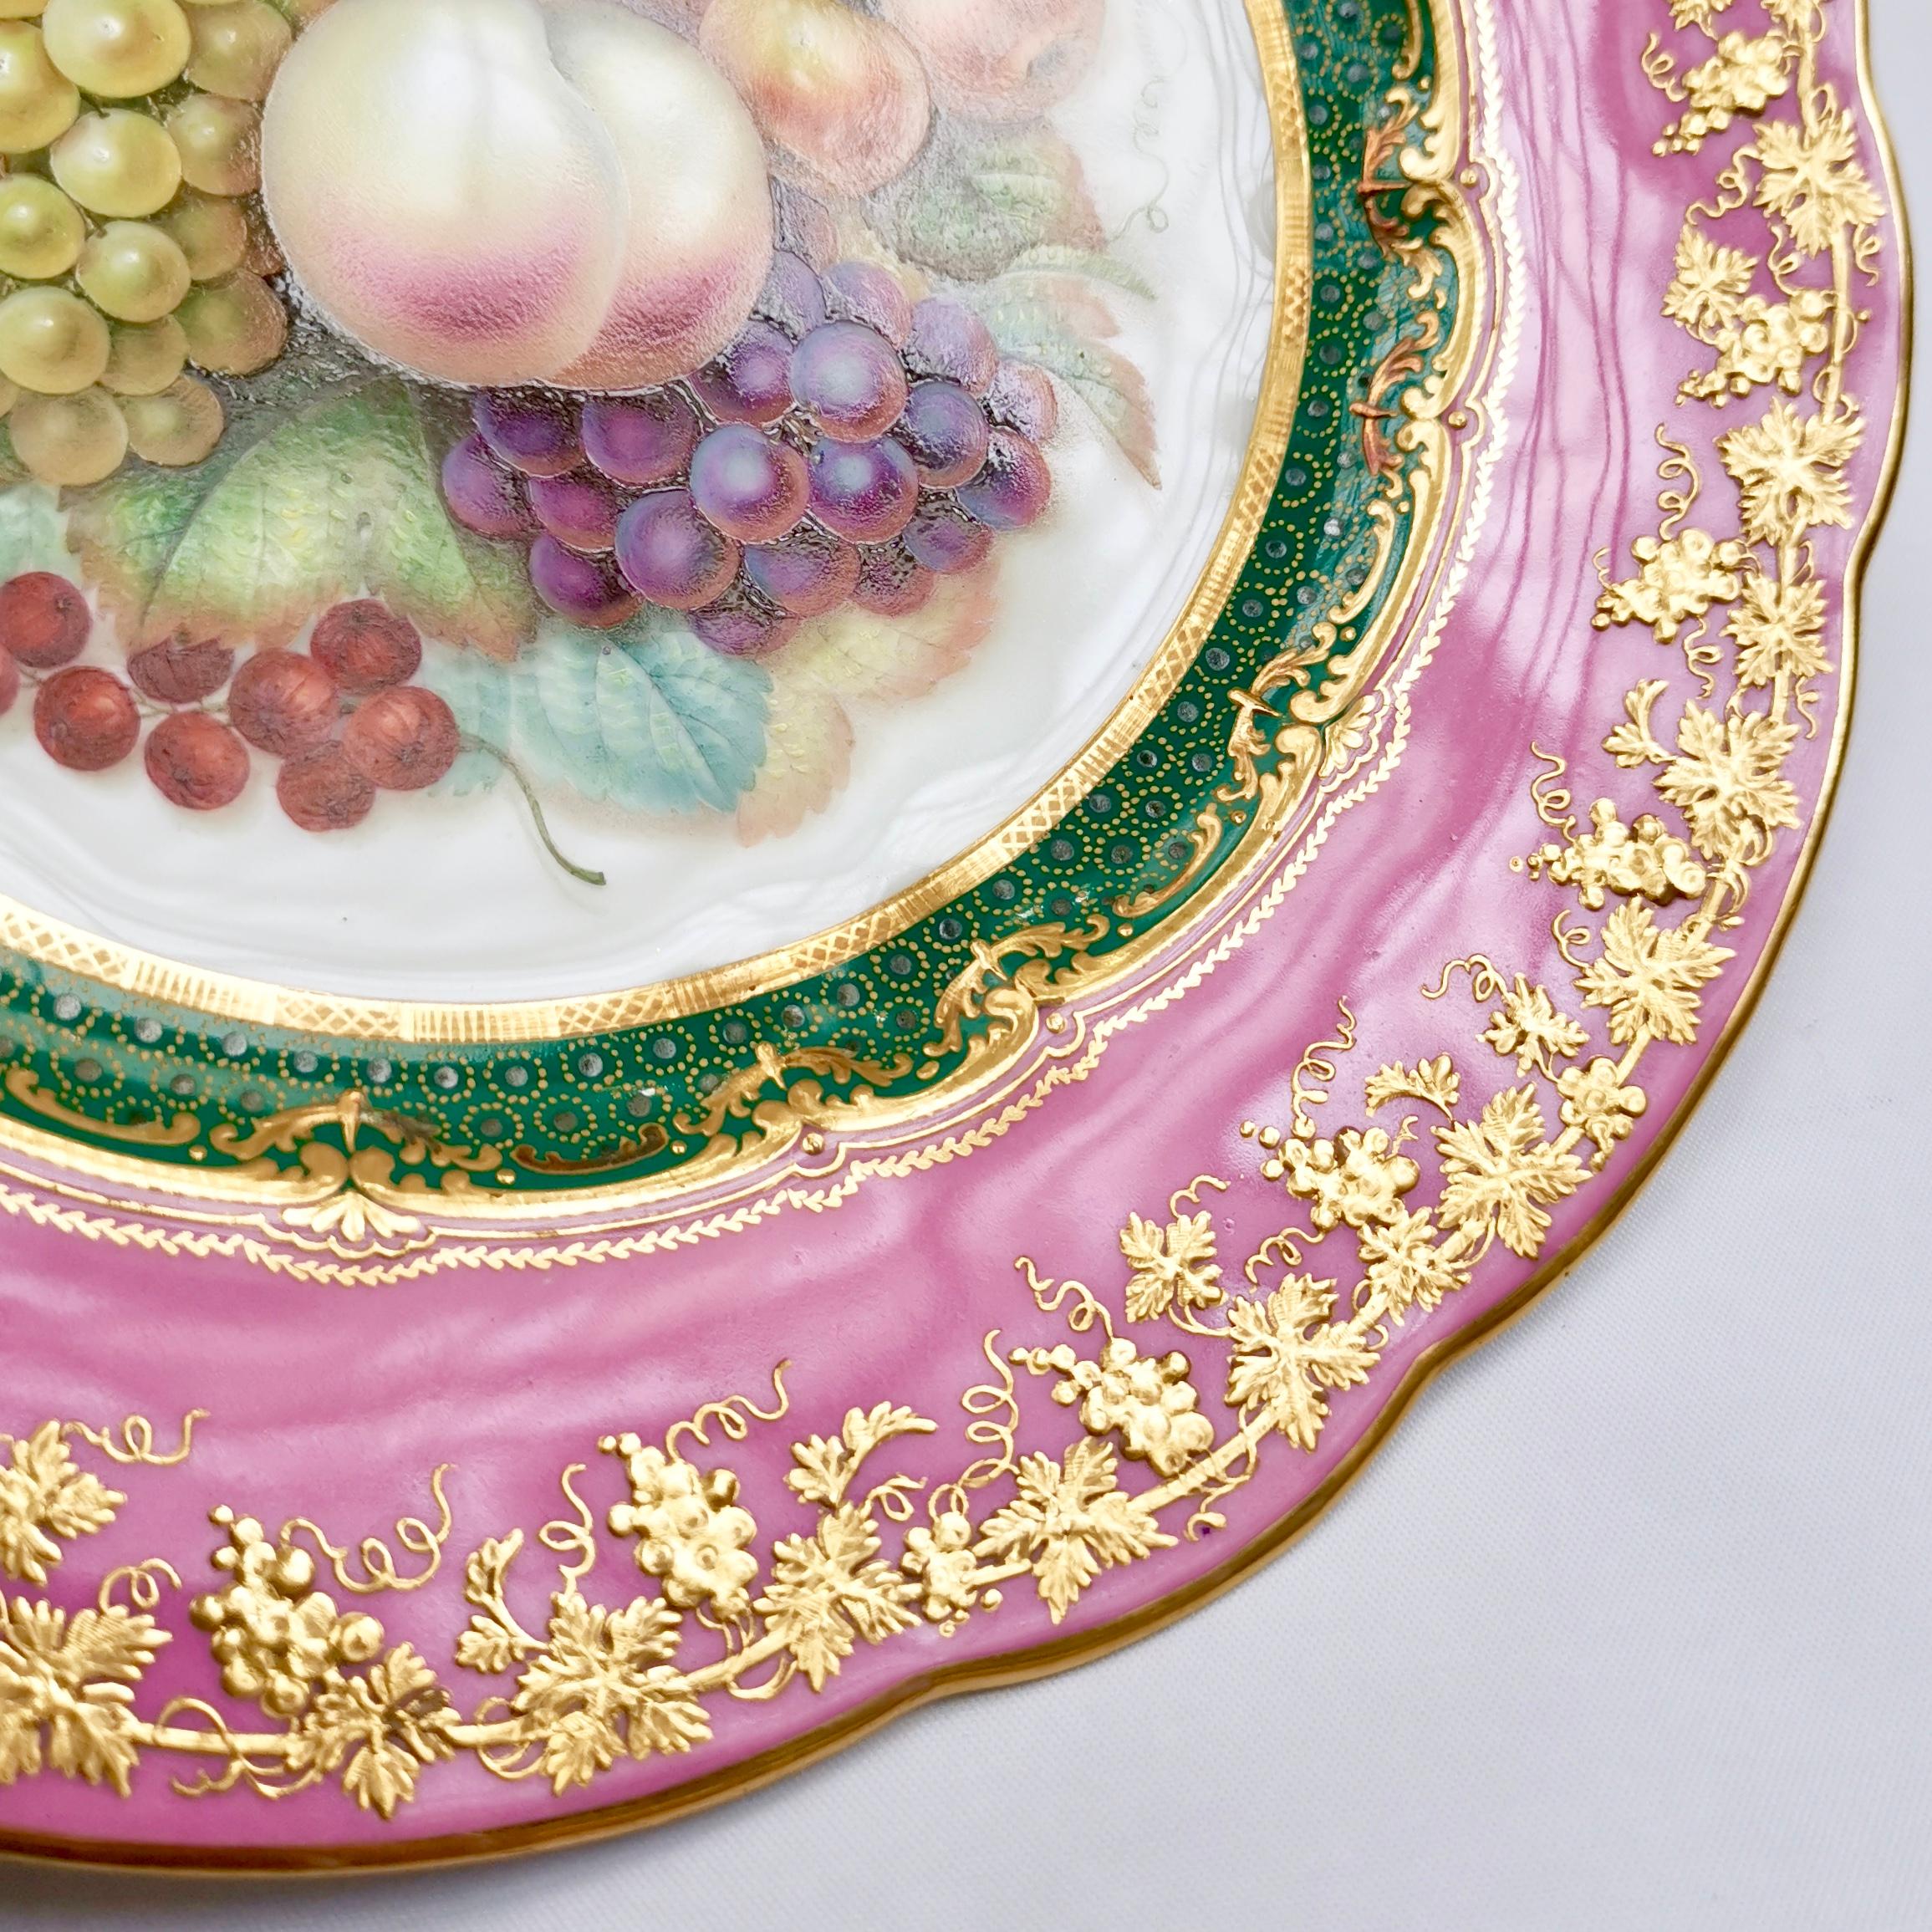 This is a very rare plate made by Coalport in circa 1870. The plate has a bright 